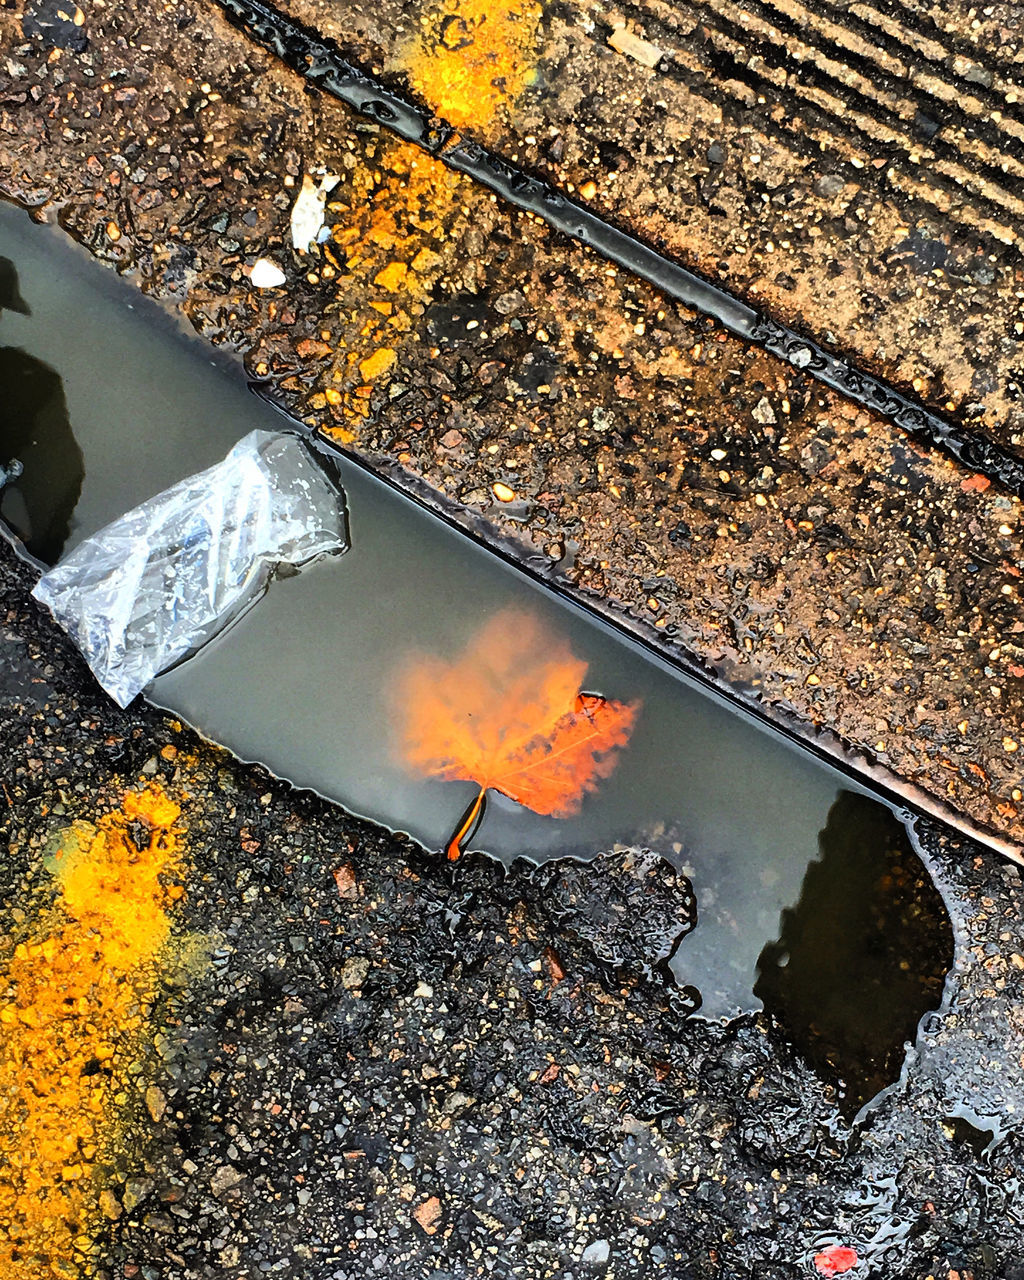 REFLECTION OF TREES IN PUDDLE